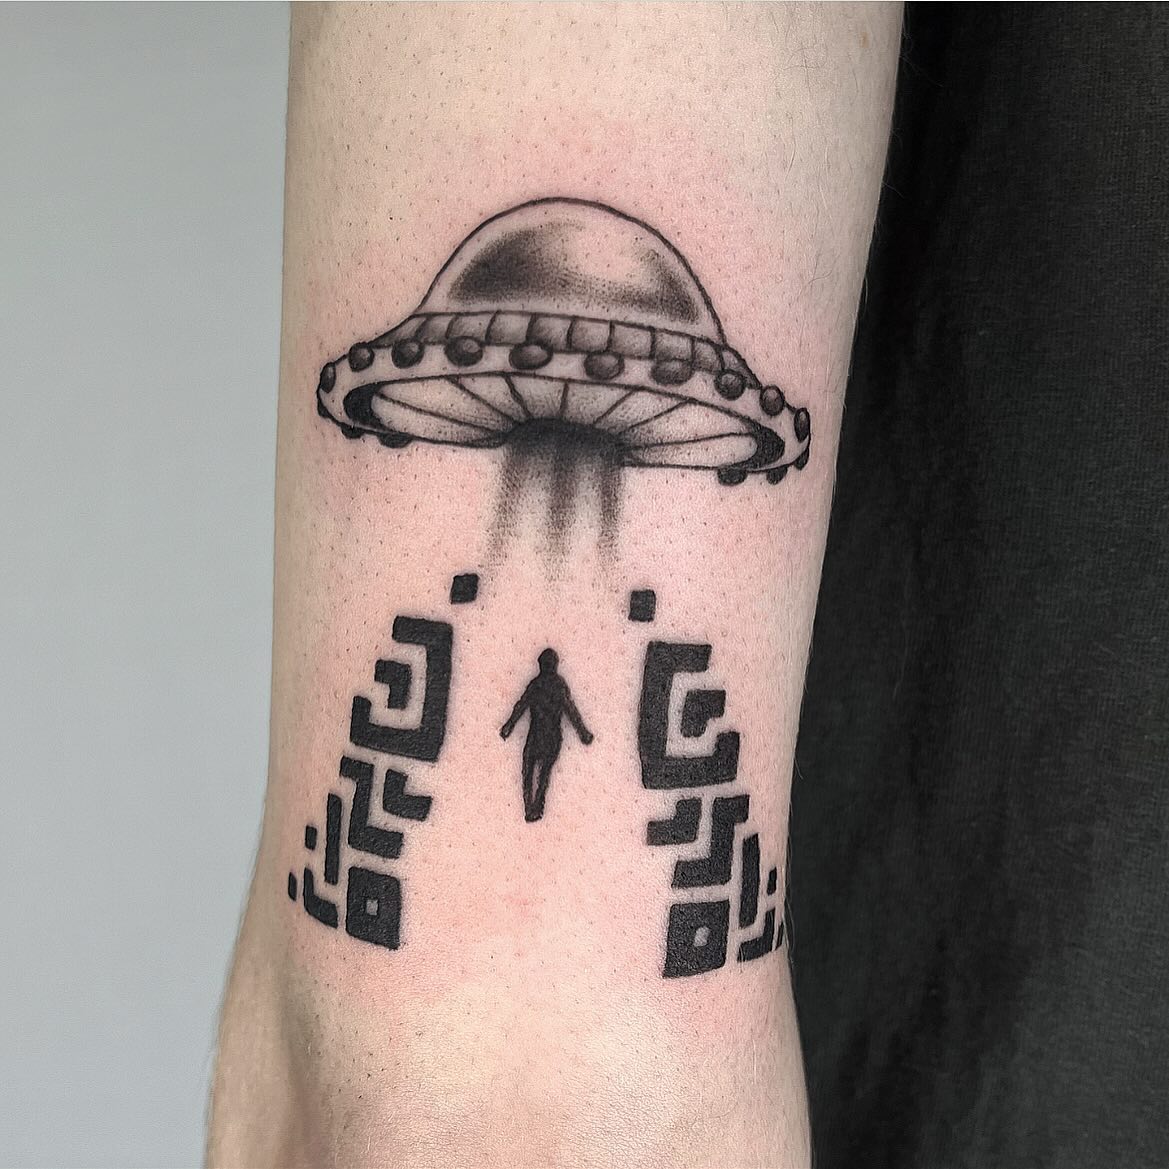 small alien by jhtly.tattoo